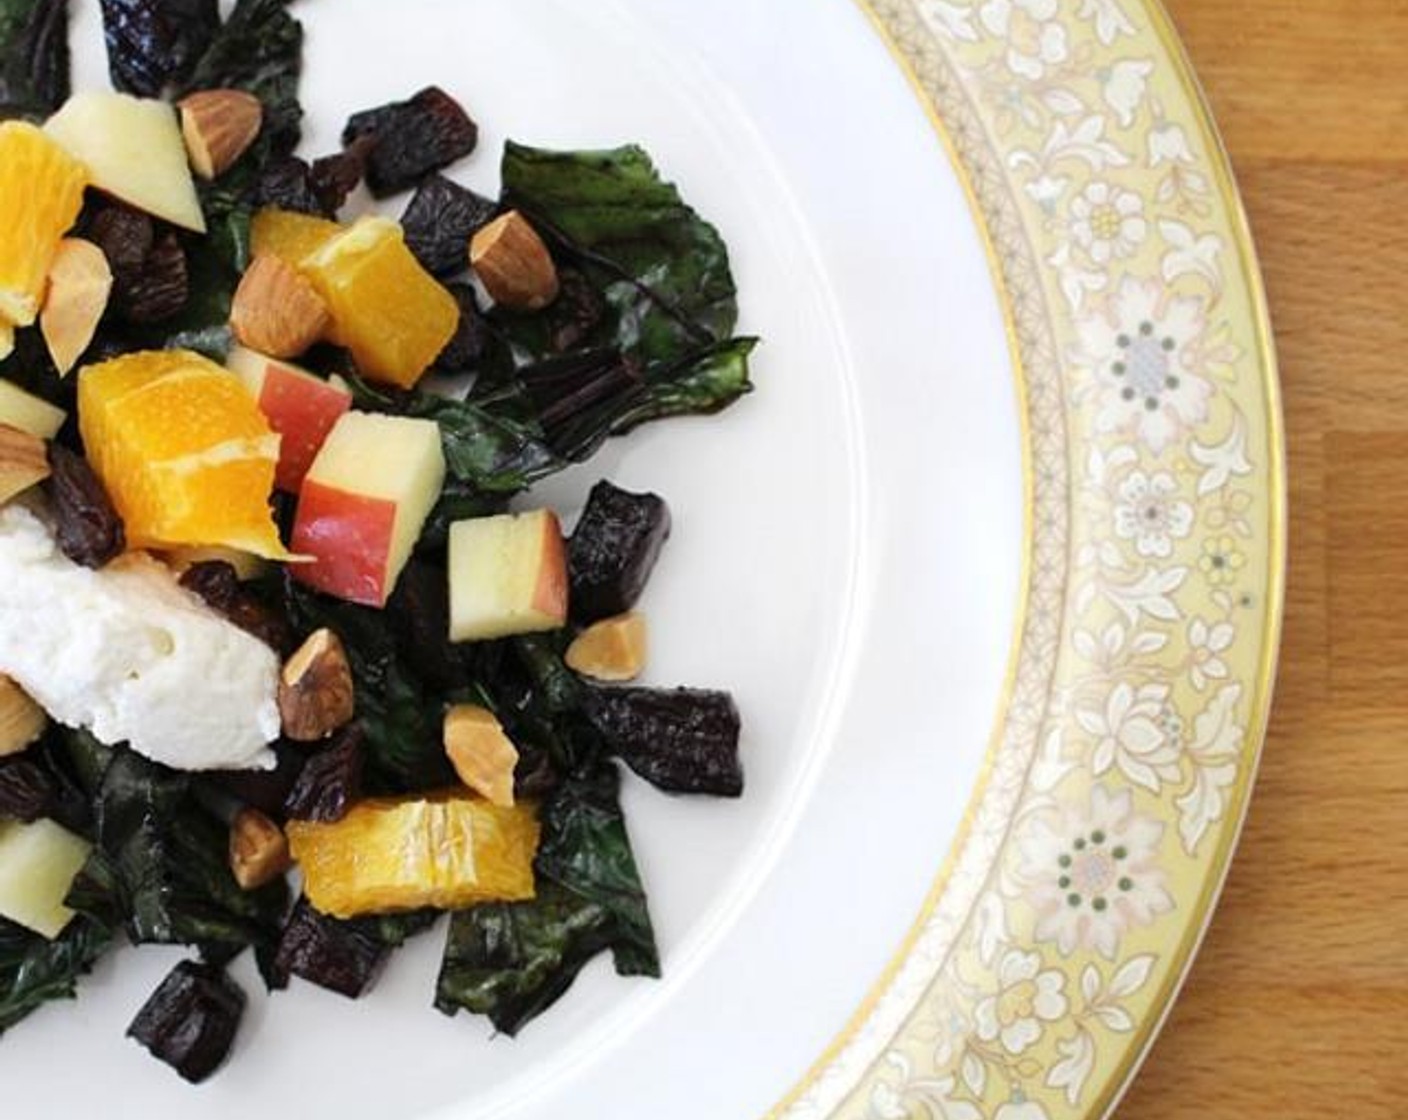 Warm Beet Salad with Fruit and Nuts